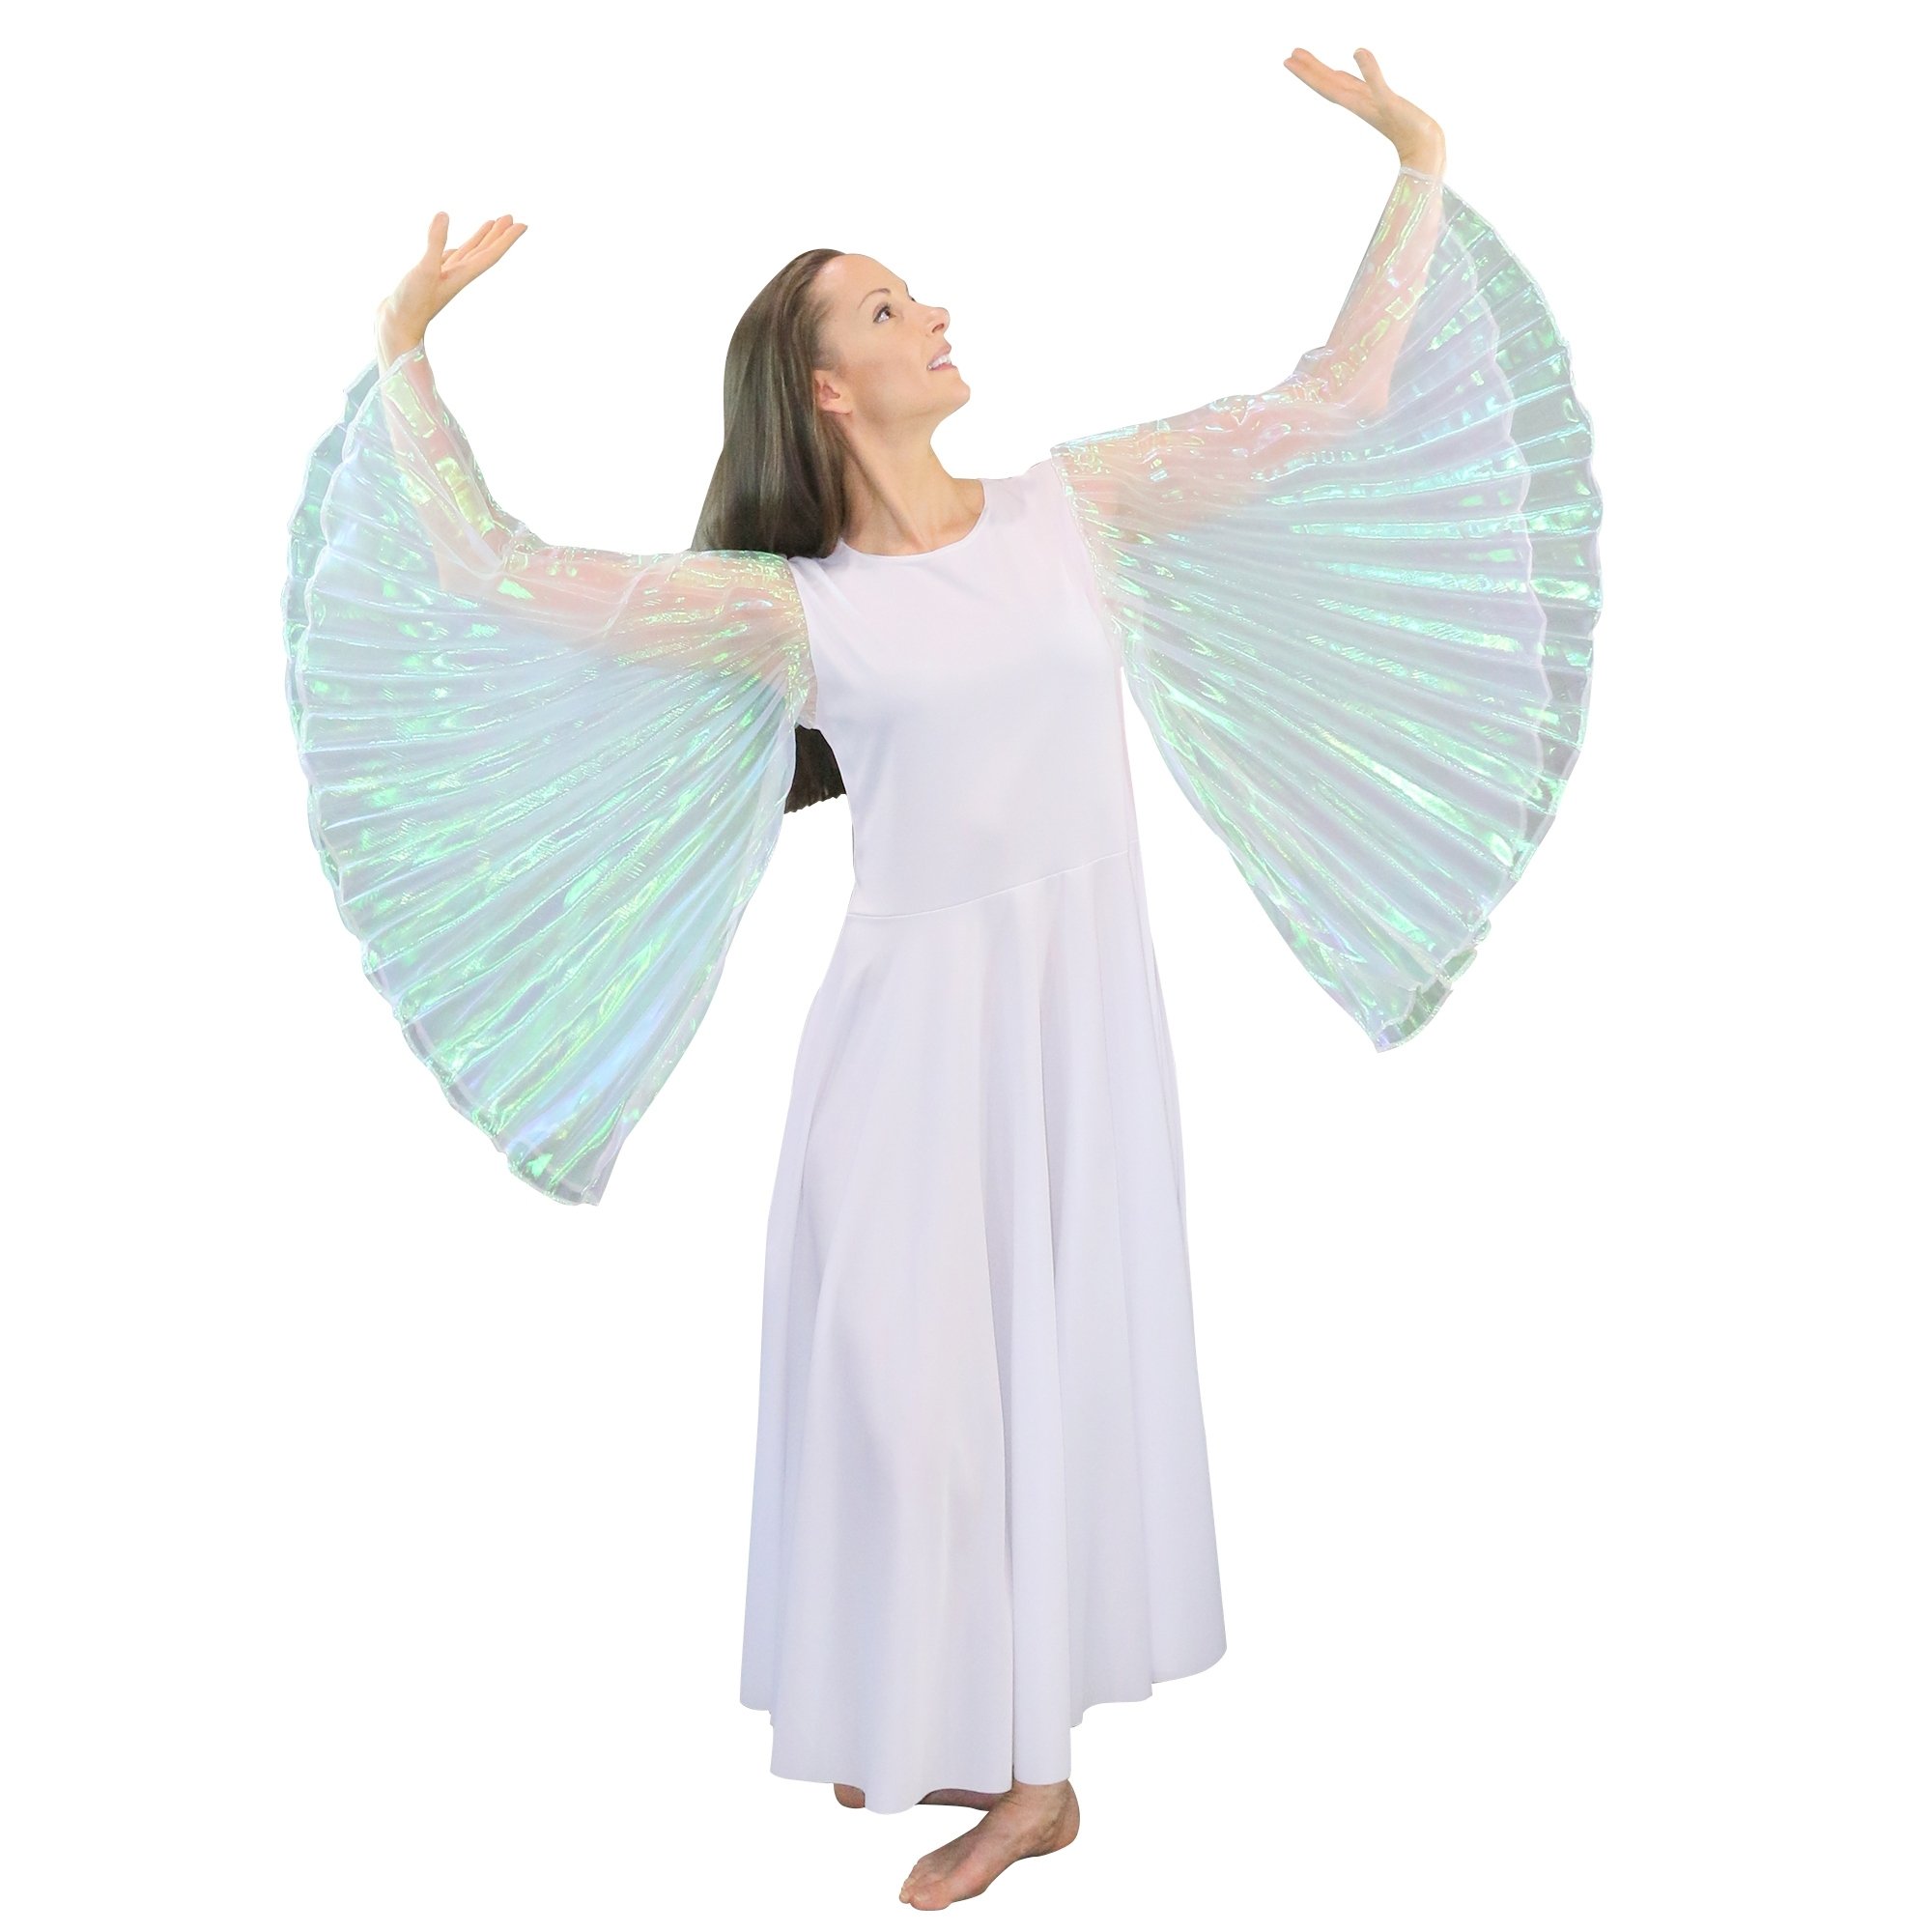 Danzcue Praise Dance Full Length Wing Sleeve Dress - Click Image to Close